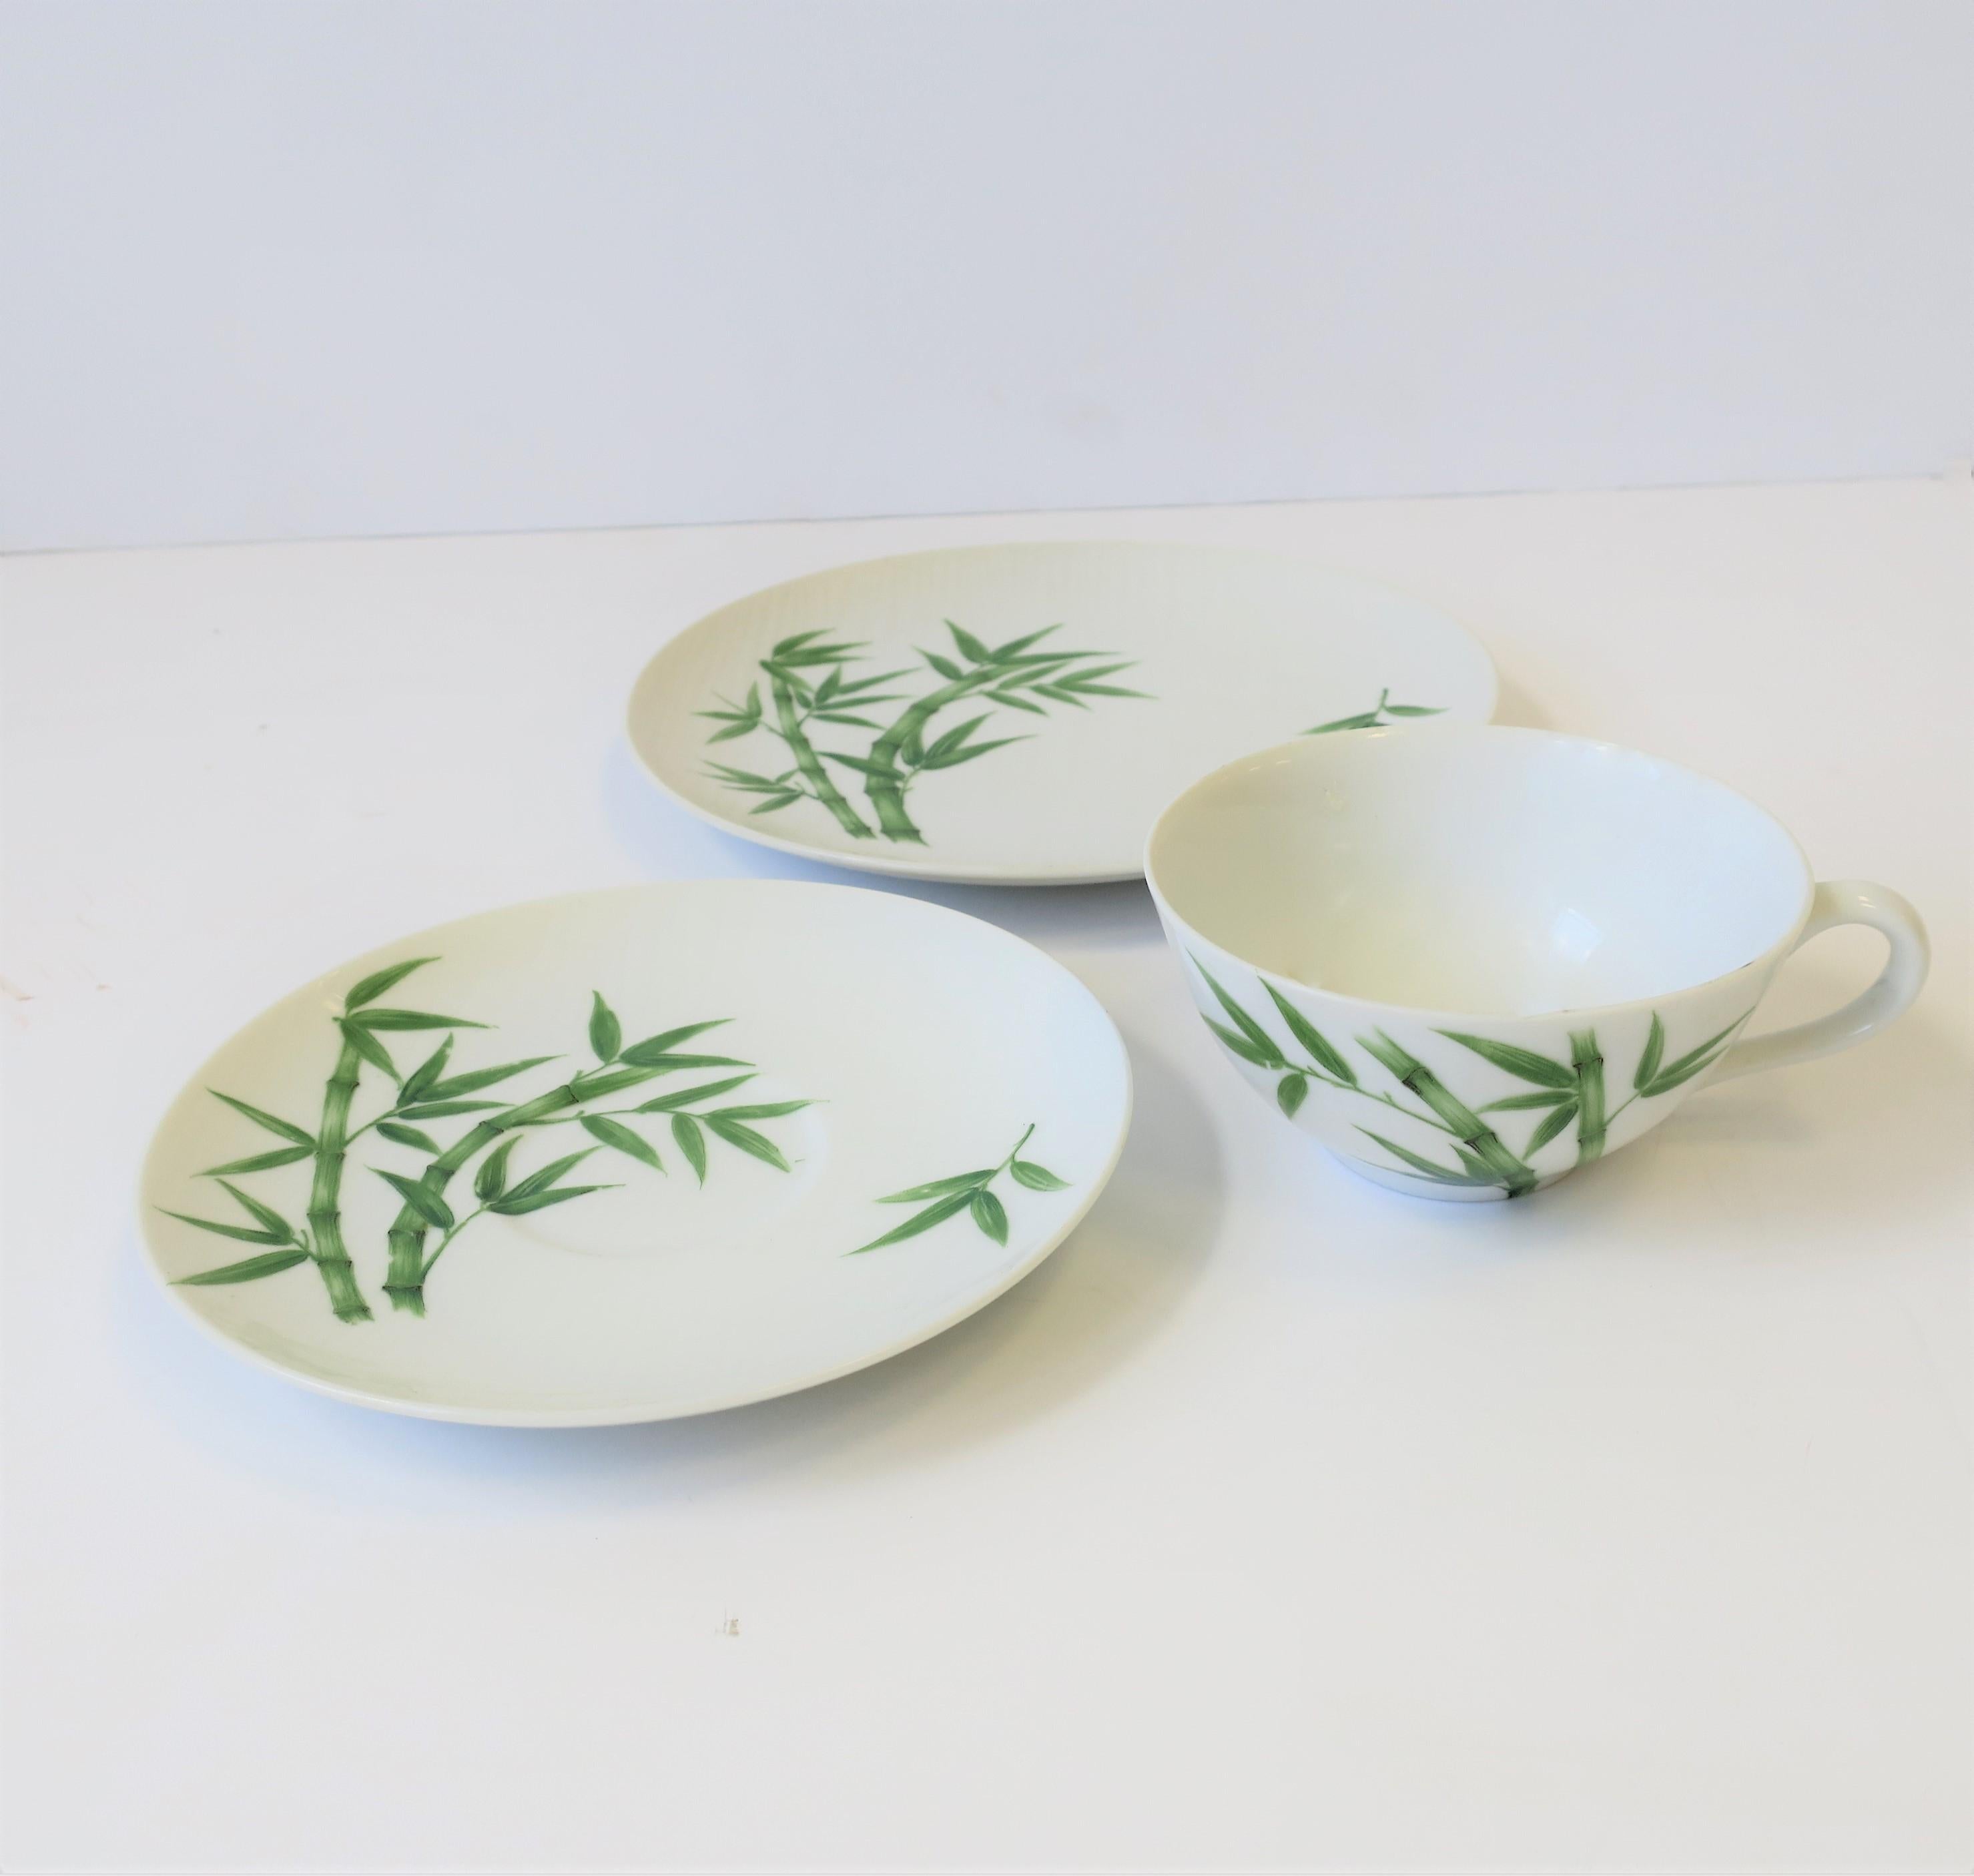 20th Century Bamboo White & Green Porcelain Lunch Dessert Tea/Coffee Dining Set of 6